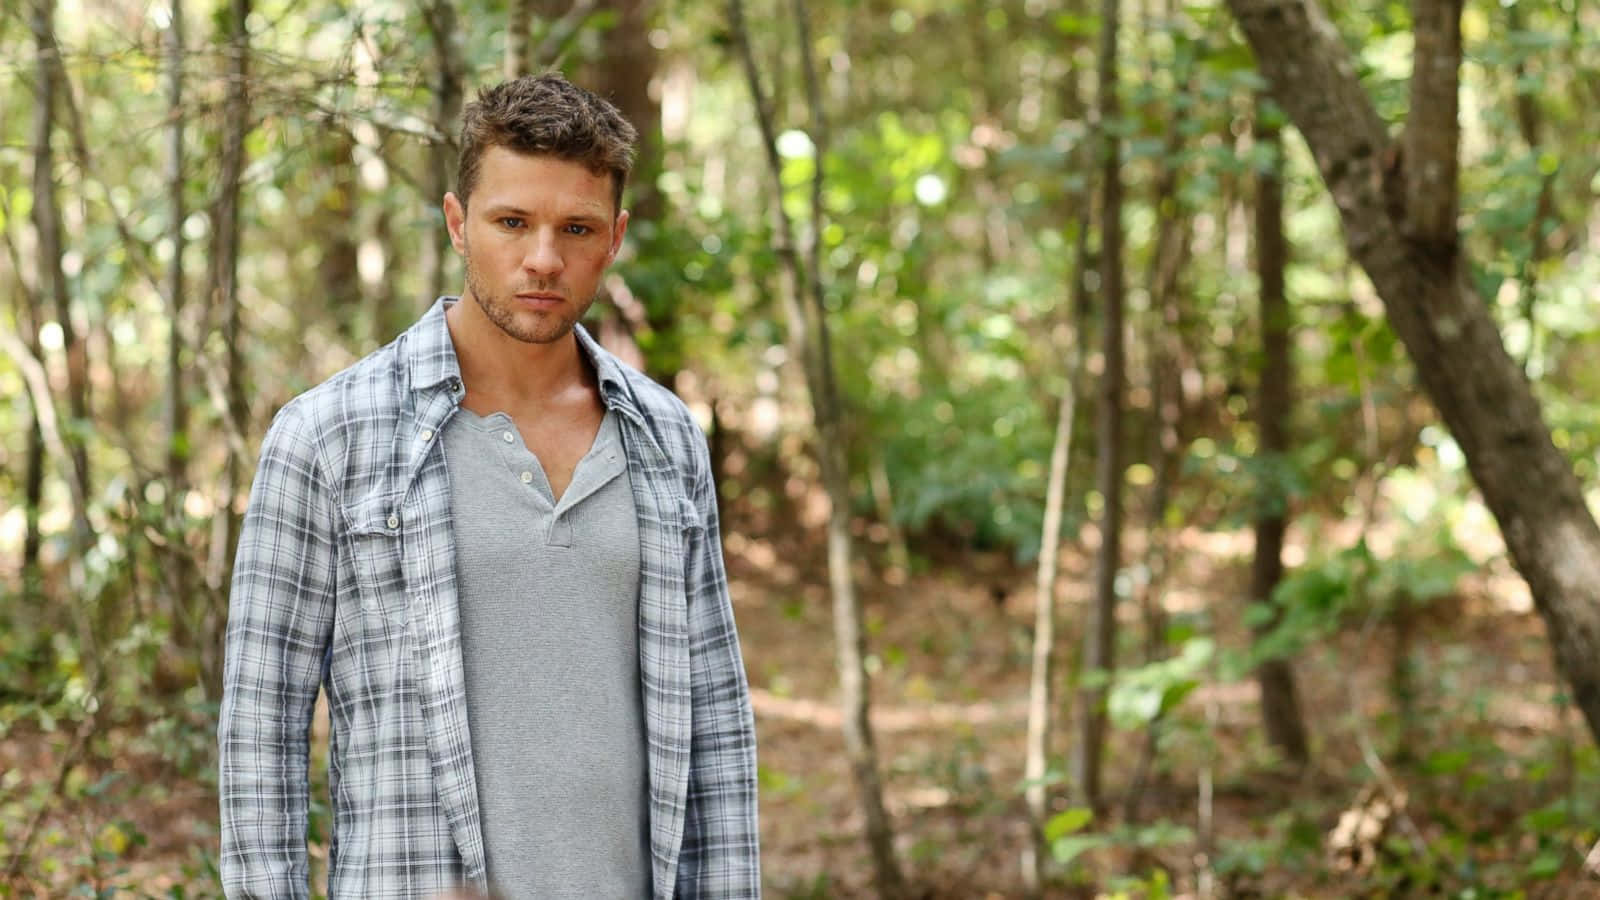 Skådespelarenryan Phillippe Tv Show Still. (this Is A Direct Translation And Would Make Sense To A Swedish Speaker, But It May Sound More Natural To Say 